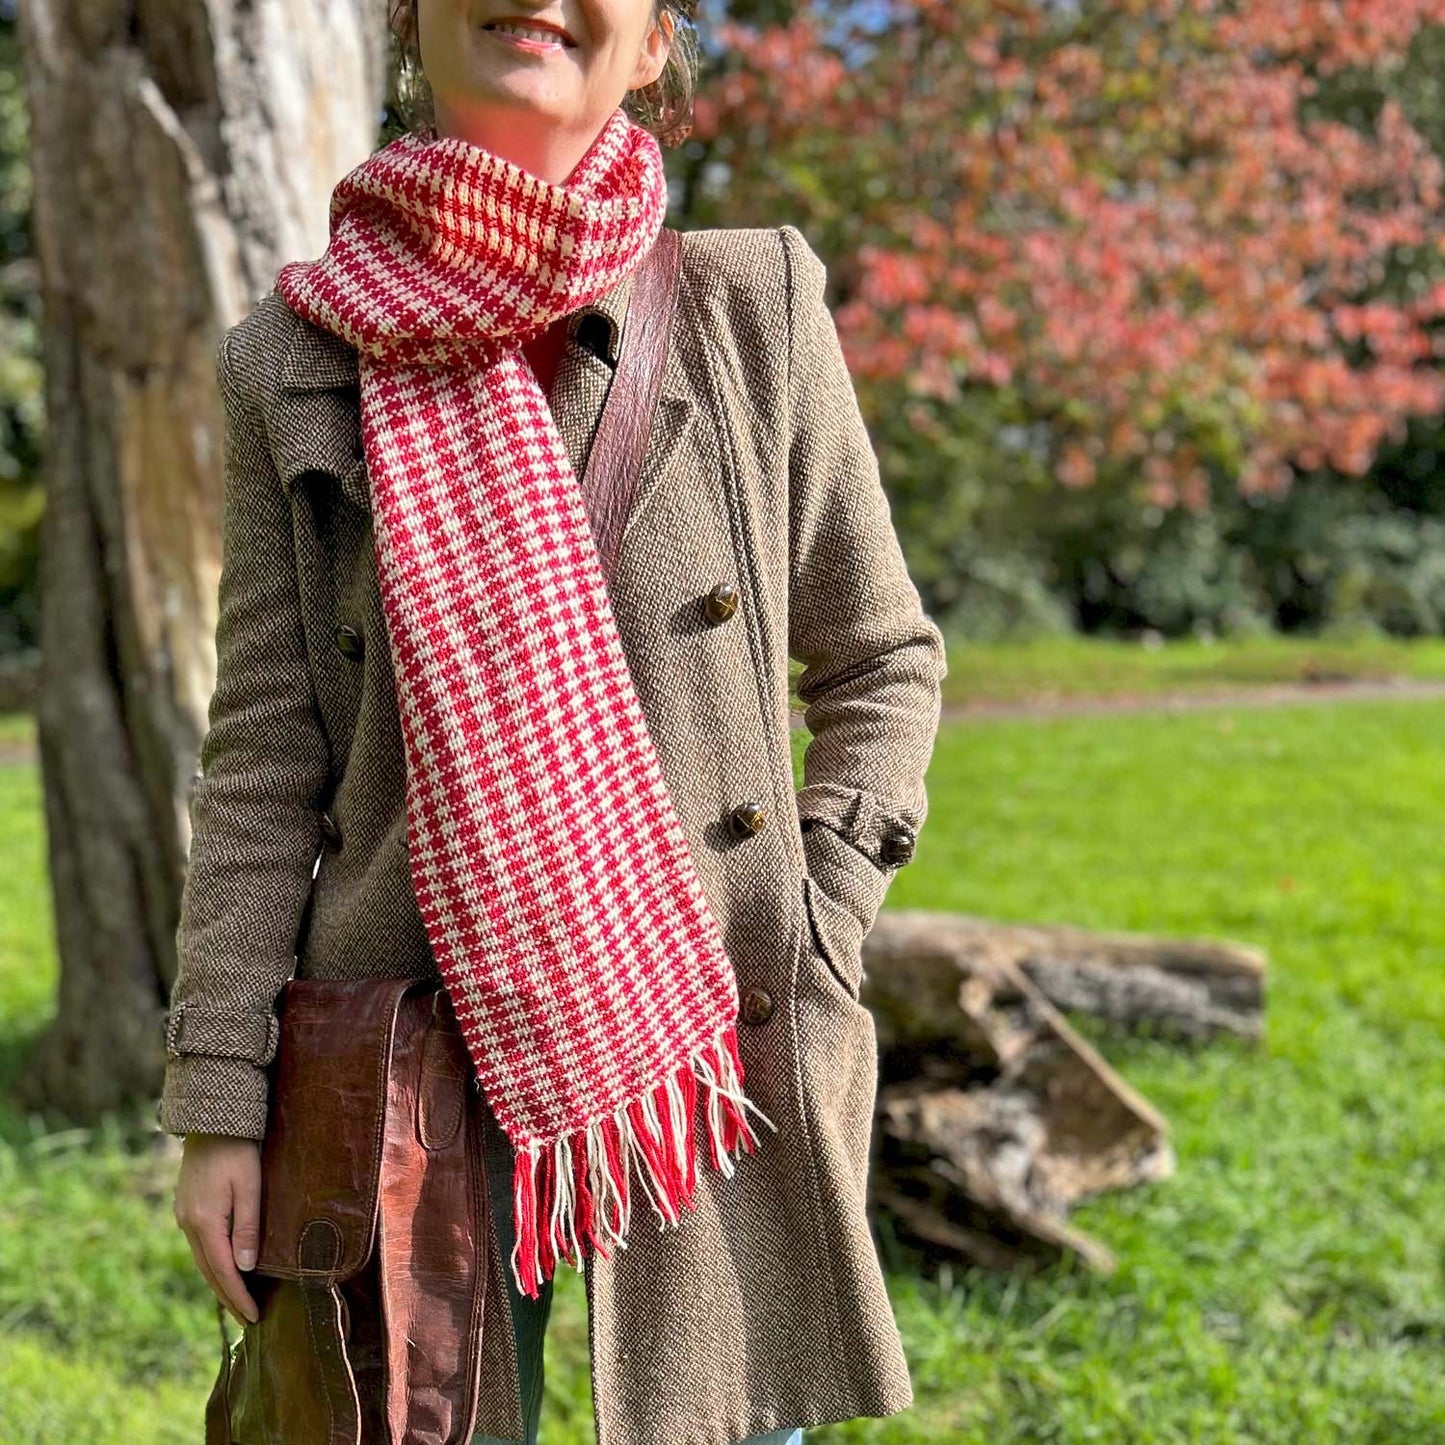 Scarf - 100% Wool - Handwoven - Welsh Checked - Red & Cream